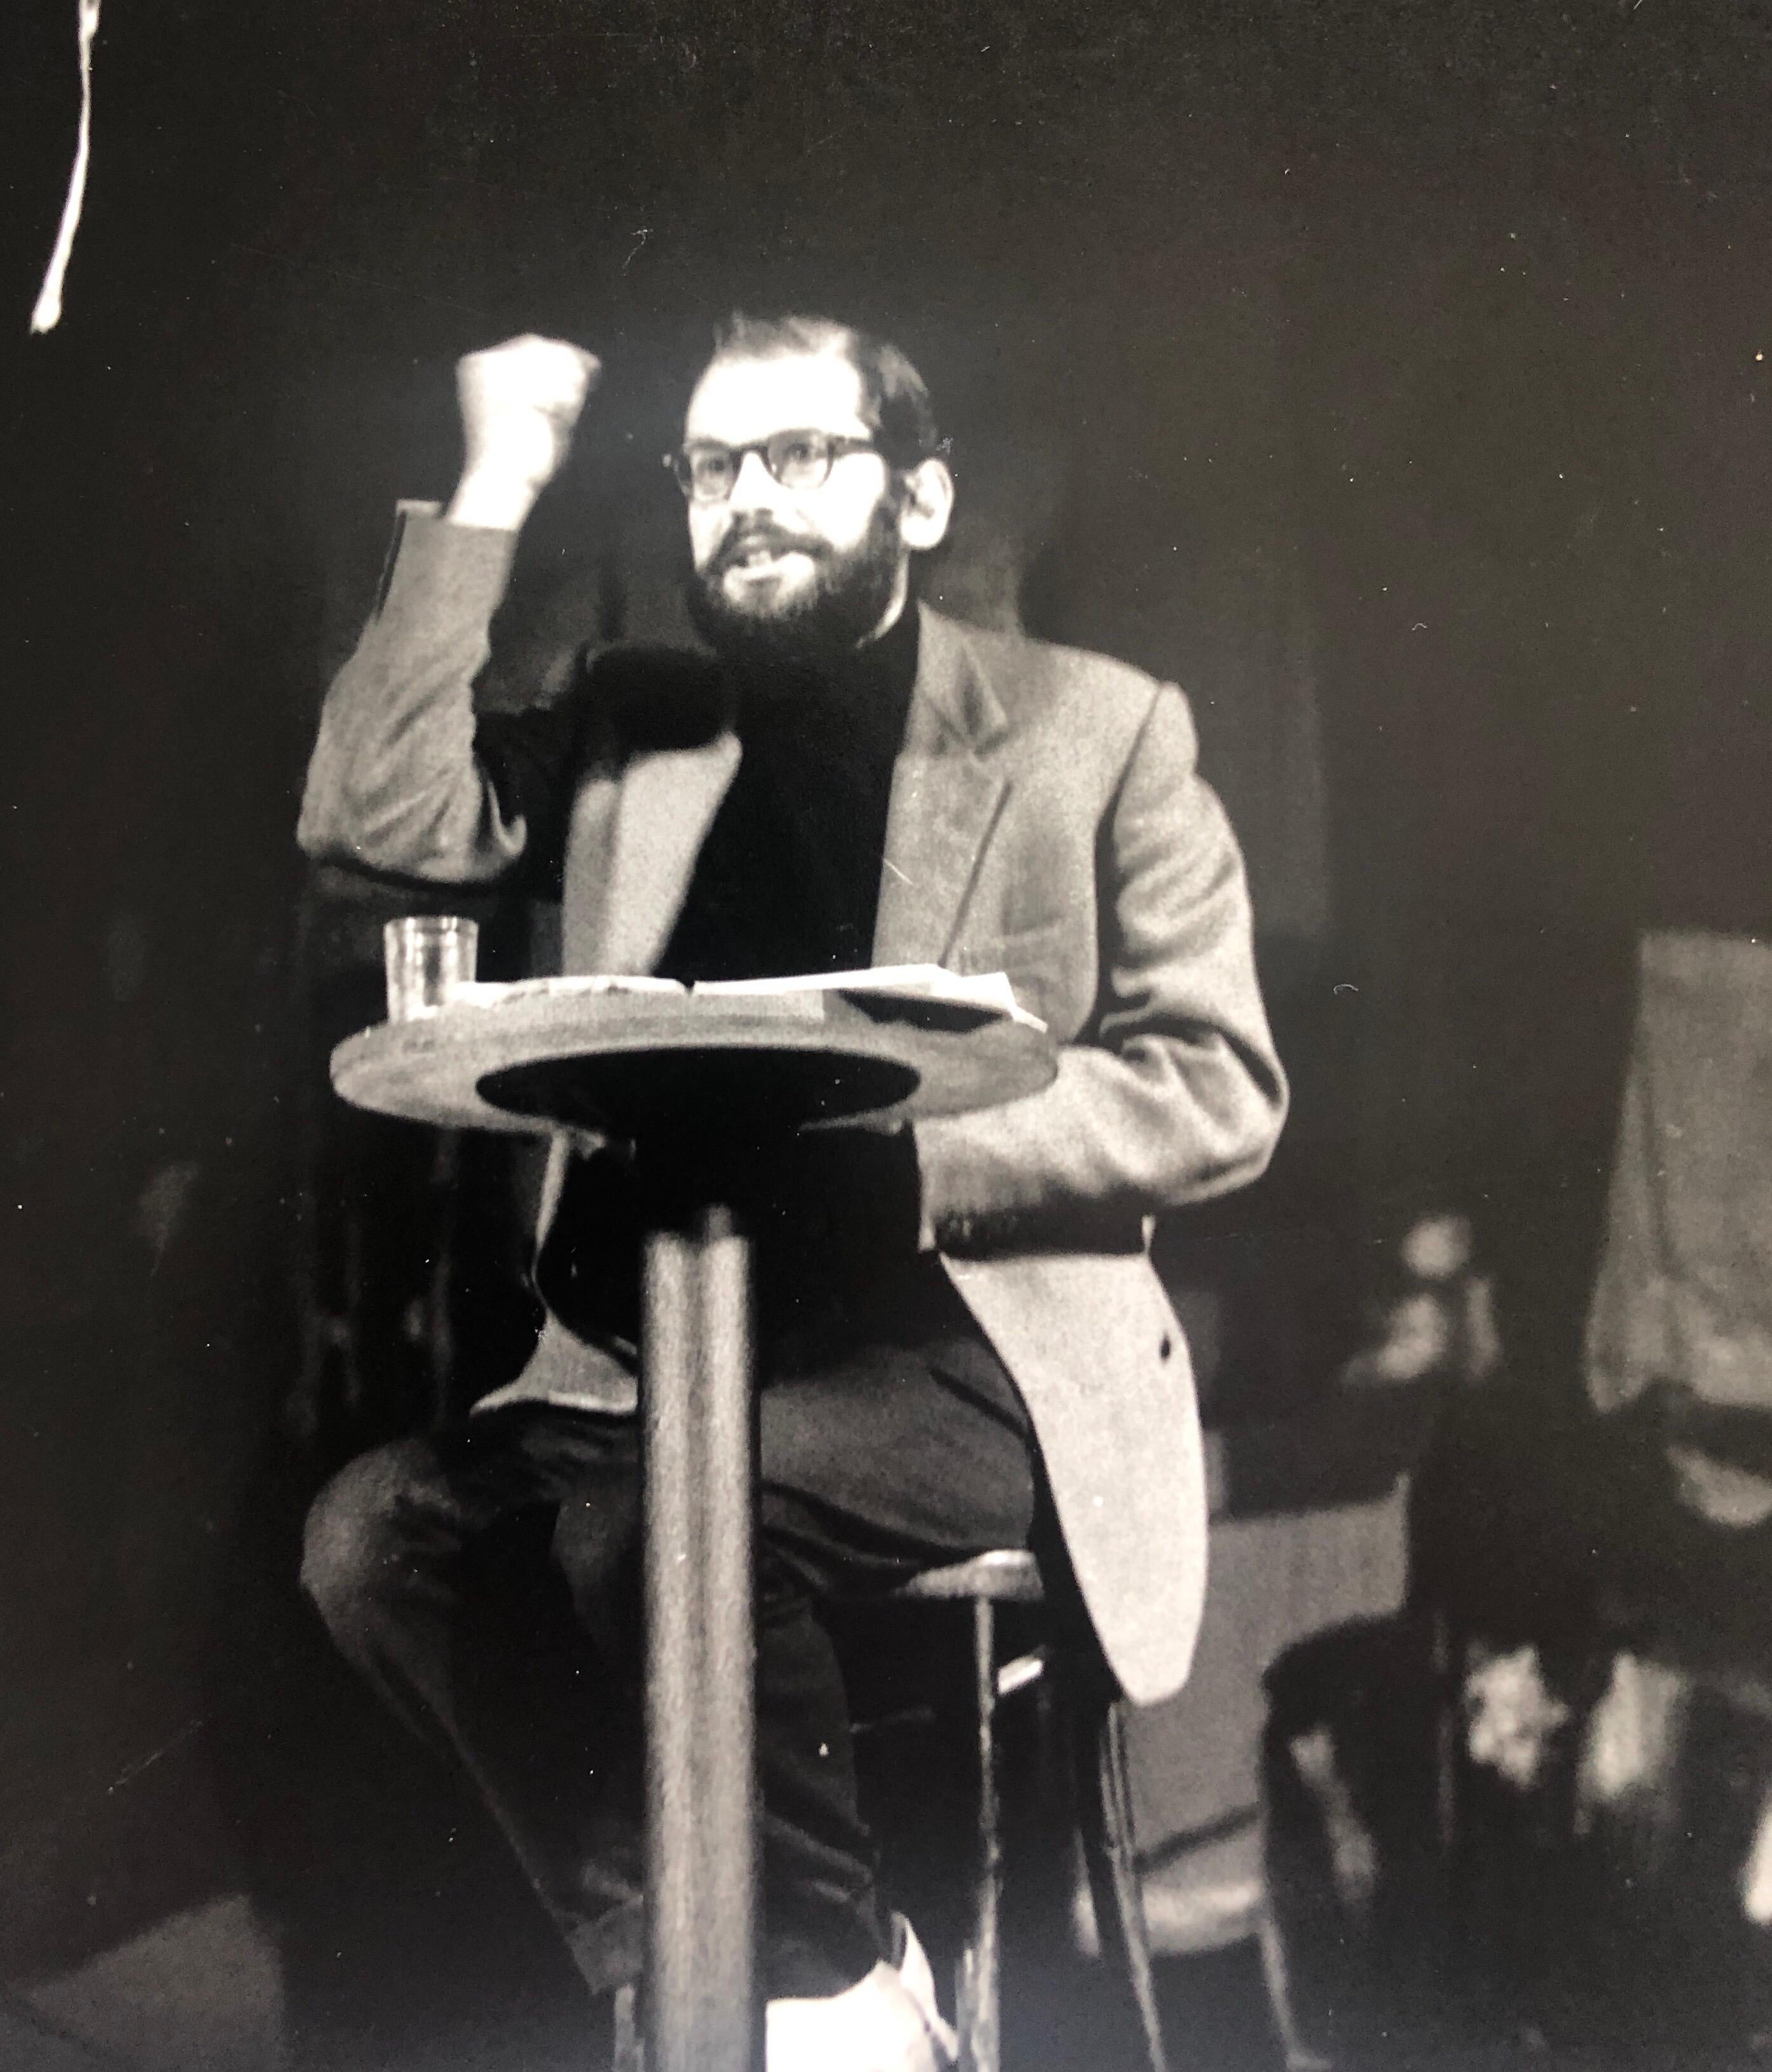 Allen Ginsberg reading Howl and other poems at Living Theater in 1959.
signed in ink and with photographer stamp verso and hand written title.
Irwin Allen Ginsberg 1926 – 1997 was an American poet, philosopher and writer. He is considered to be one